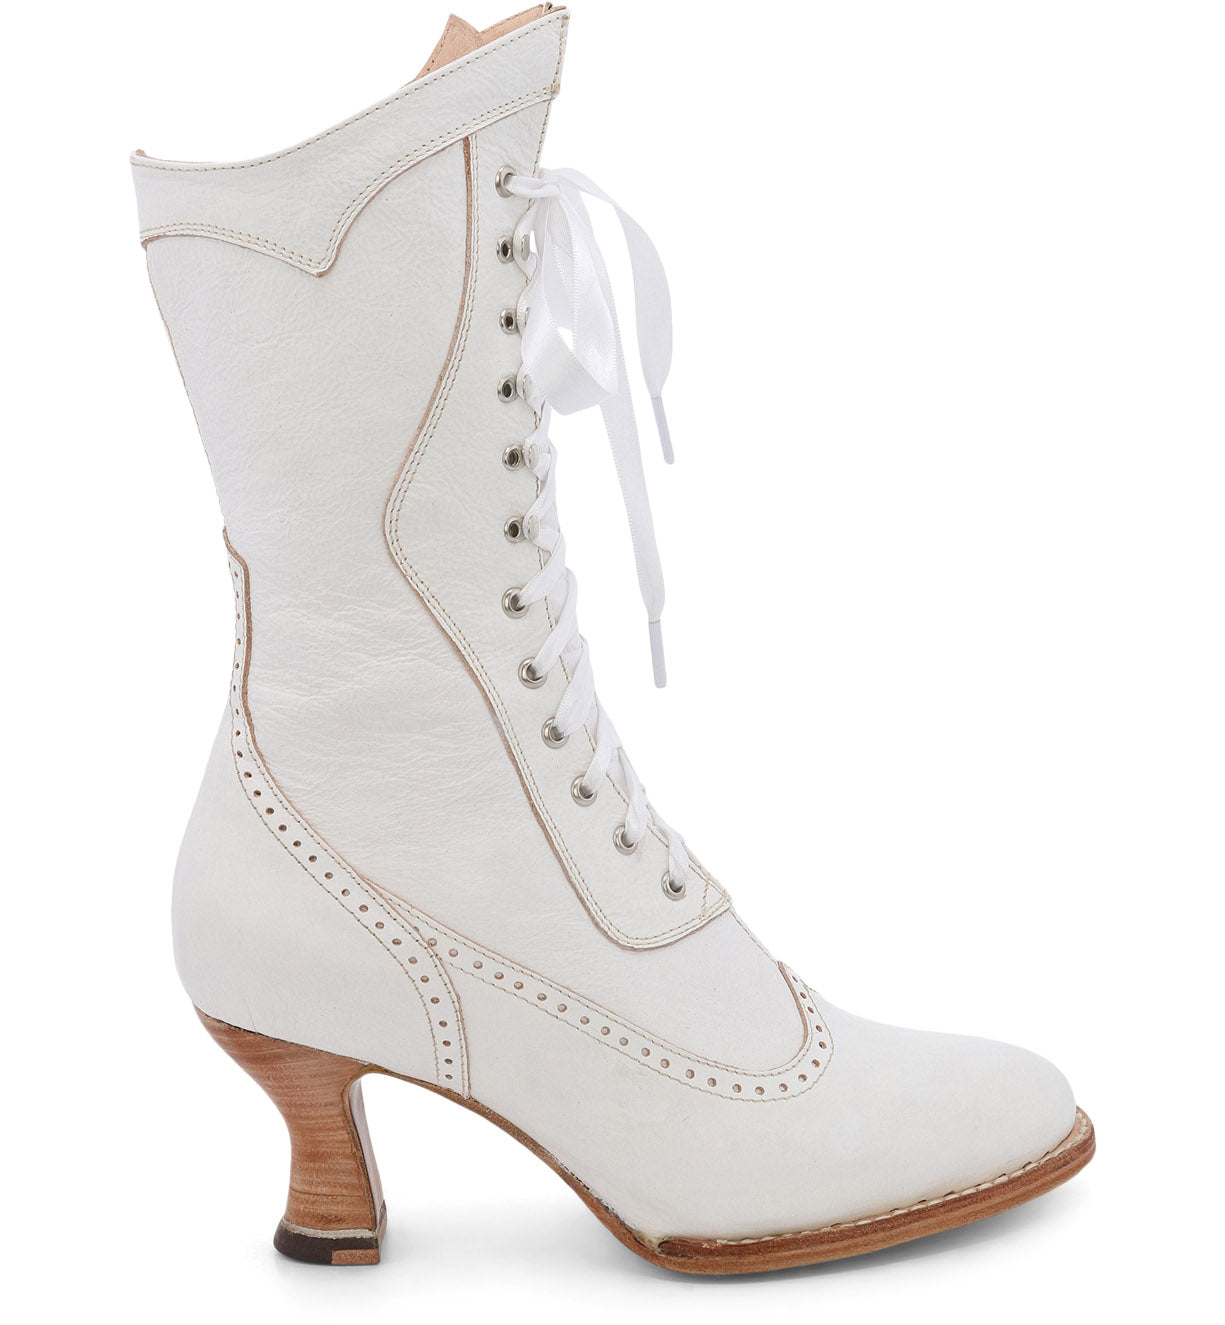 A white women's Jasmine lace-up boot from Oak Tree Farms with a wooden heel and hand dyed Black Rustic leather.